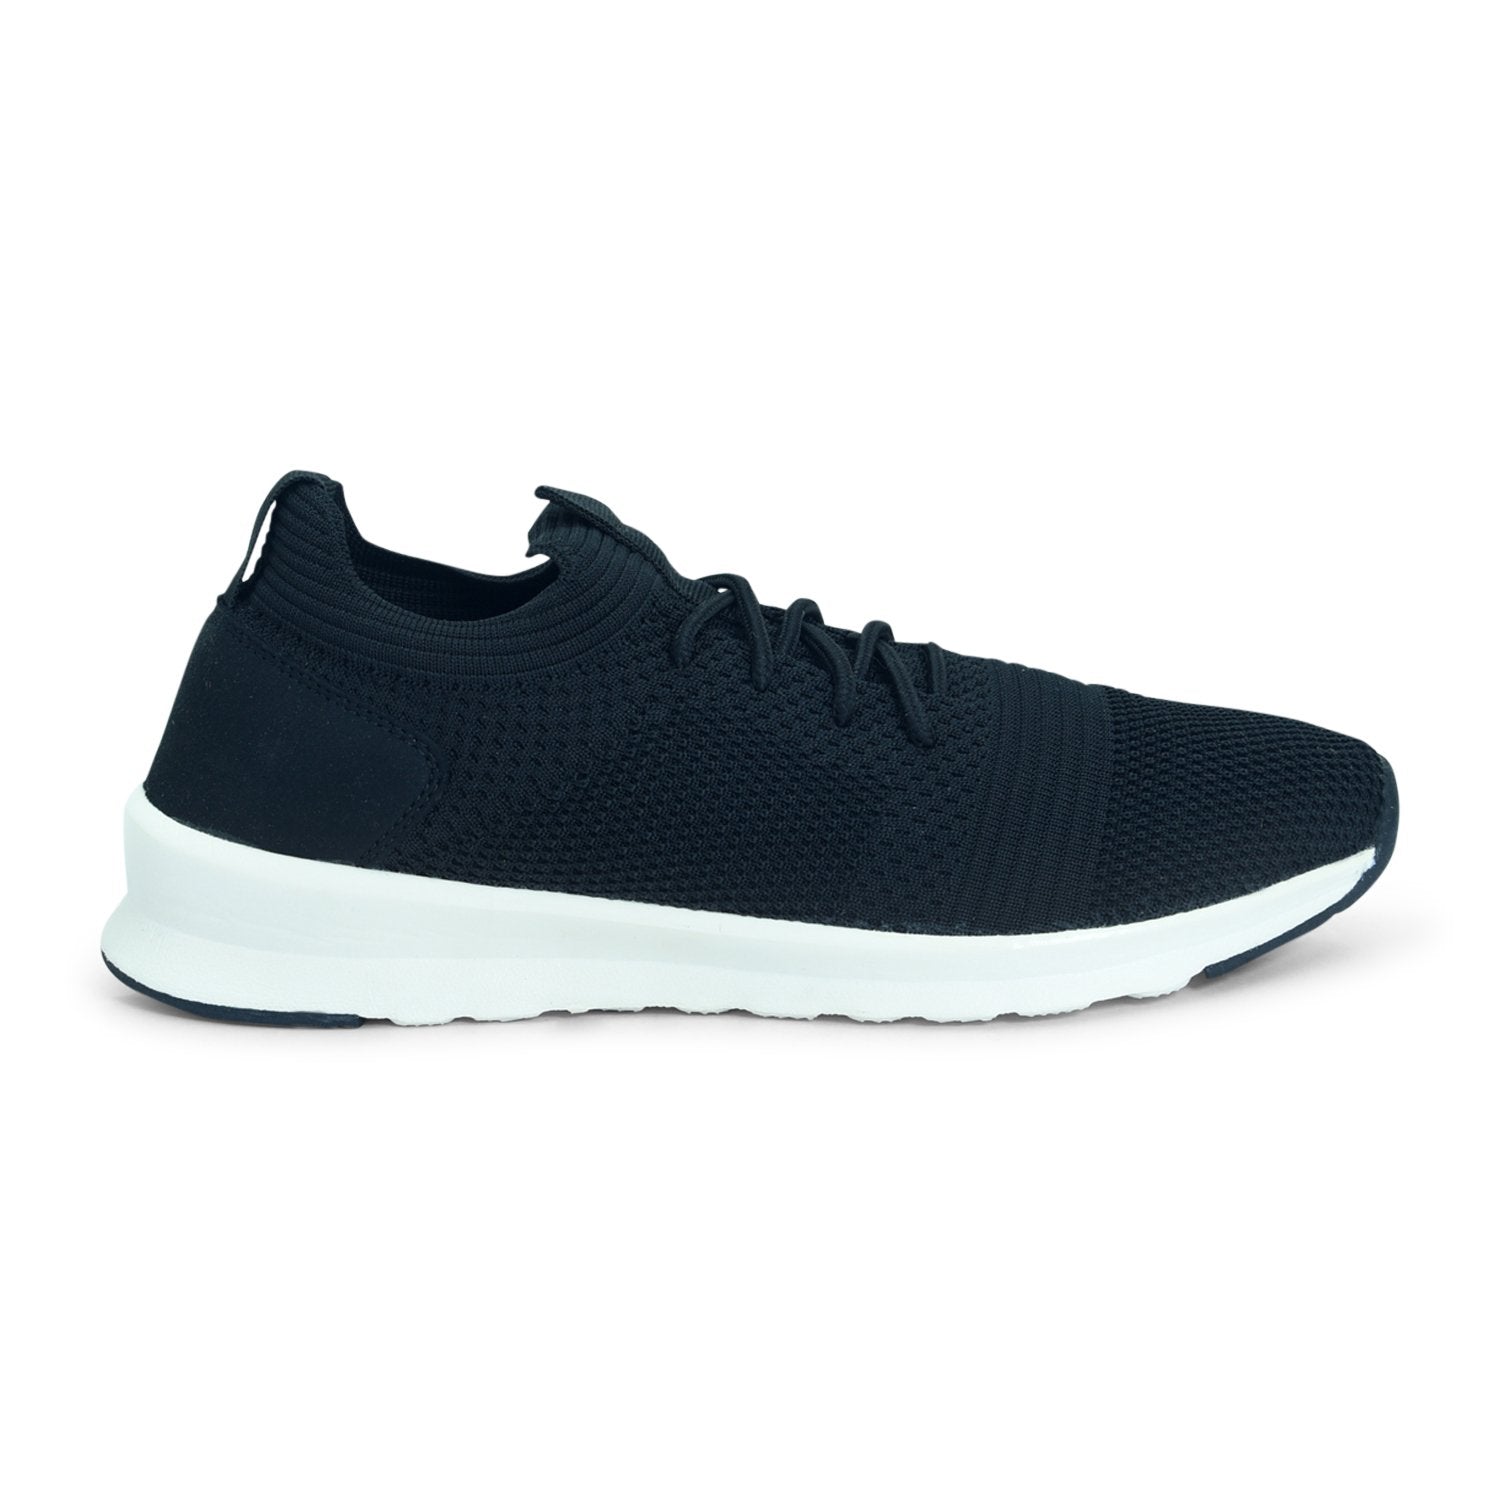 bata sneakers shoes for mens